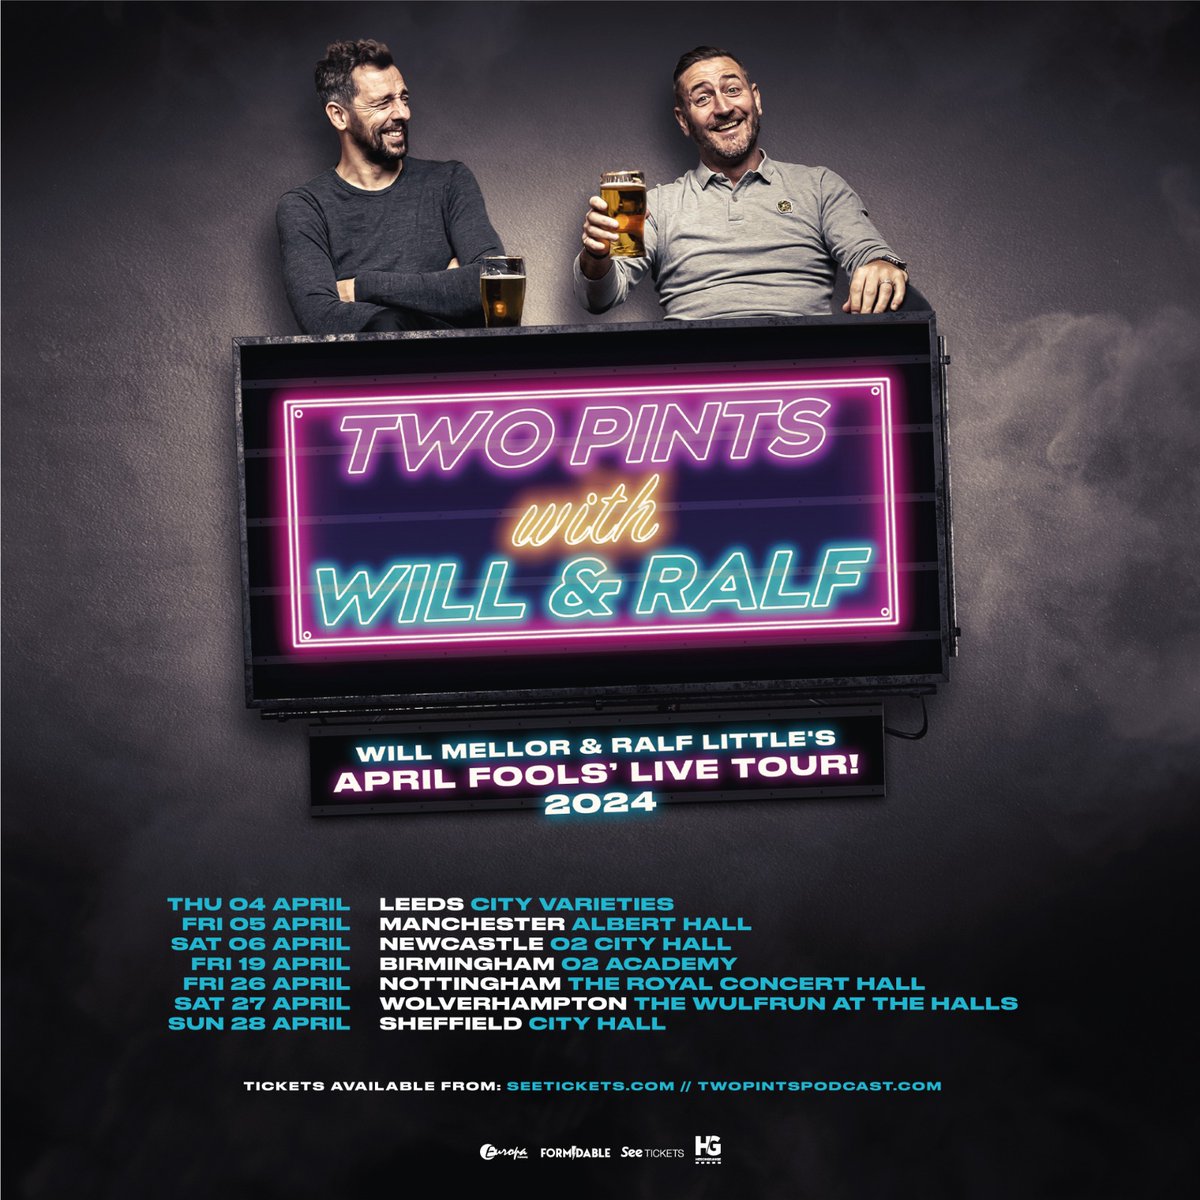 🚨 NEW SHOW! 🚨 People of LEEDS - we are excited to announce an exclusive tour warm up show at City Varieties Theatre, Thursday 4th April. Join us then to kick off the April Fools tour in style! Tickets on-sale 10am tomorrow twopintspodcast.com 🍻 @Mellor76 & @RalfLittle